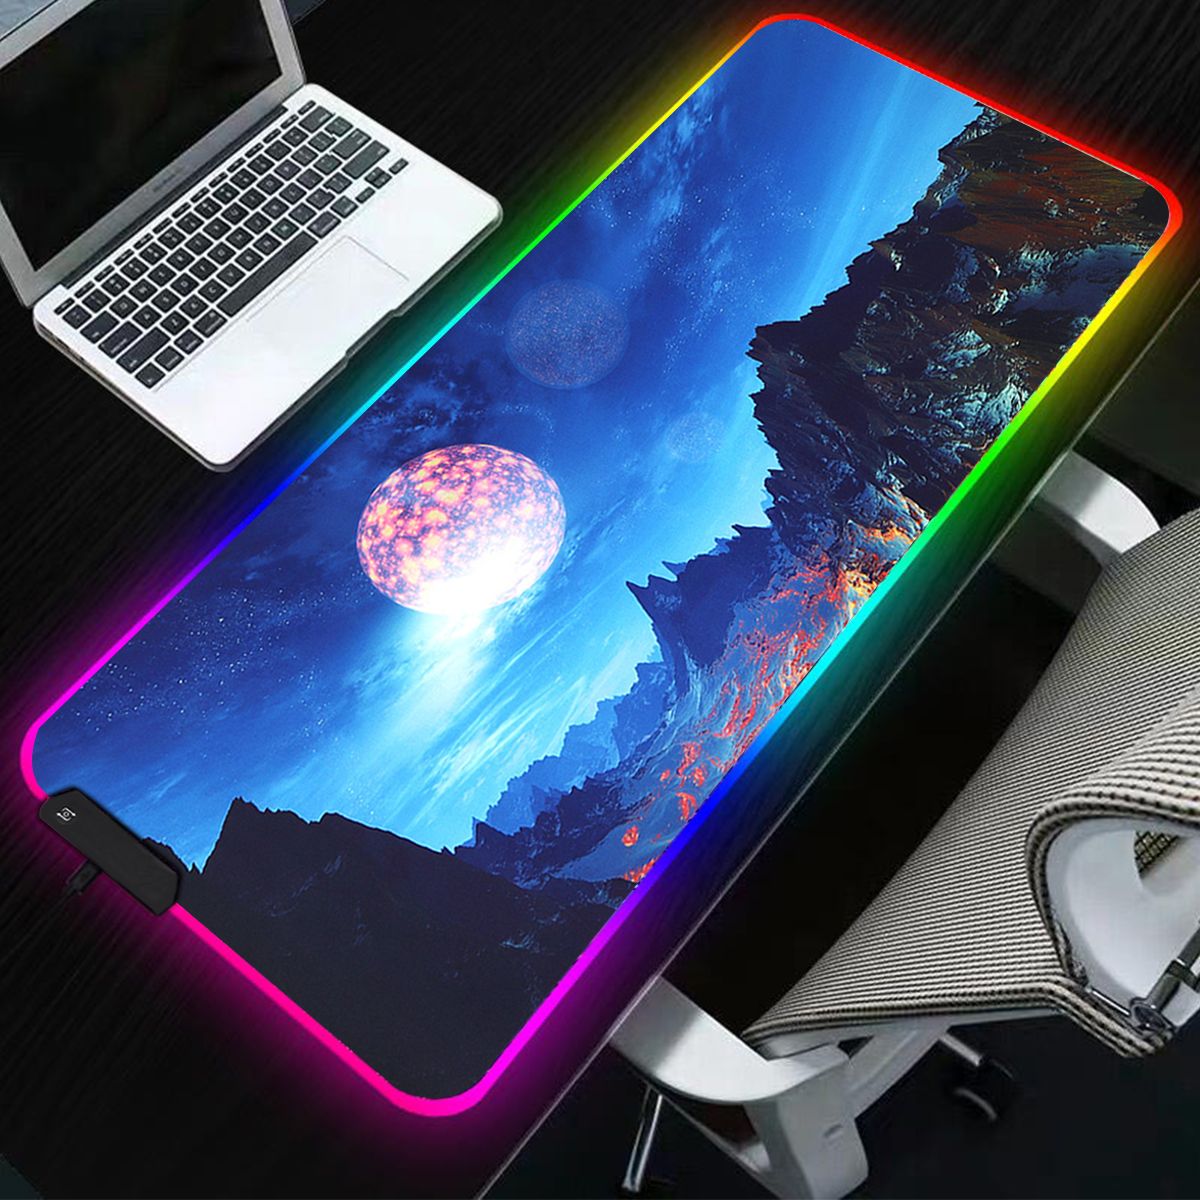 The-Snow-Mountain-USB-Wired-RGB-Colorful-Backlit-LED-Mouse-Pad-for-Gaming-Mouse-1550126